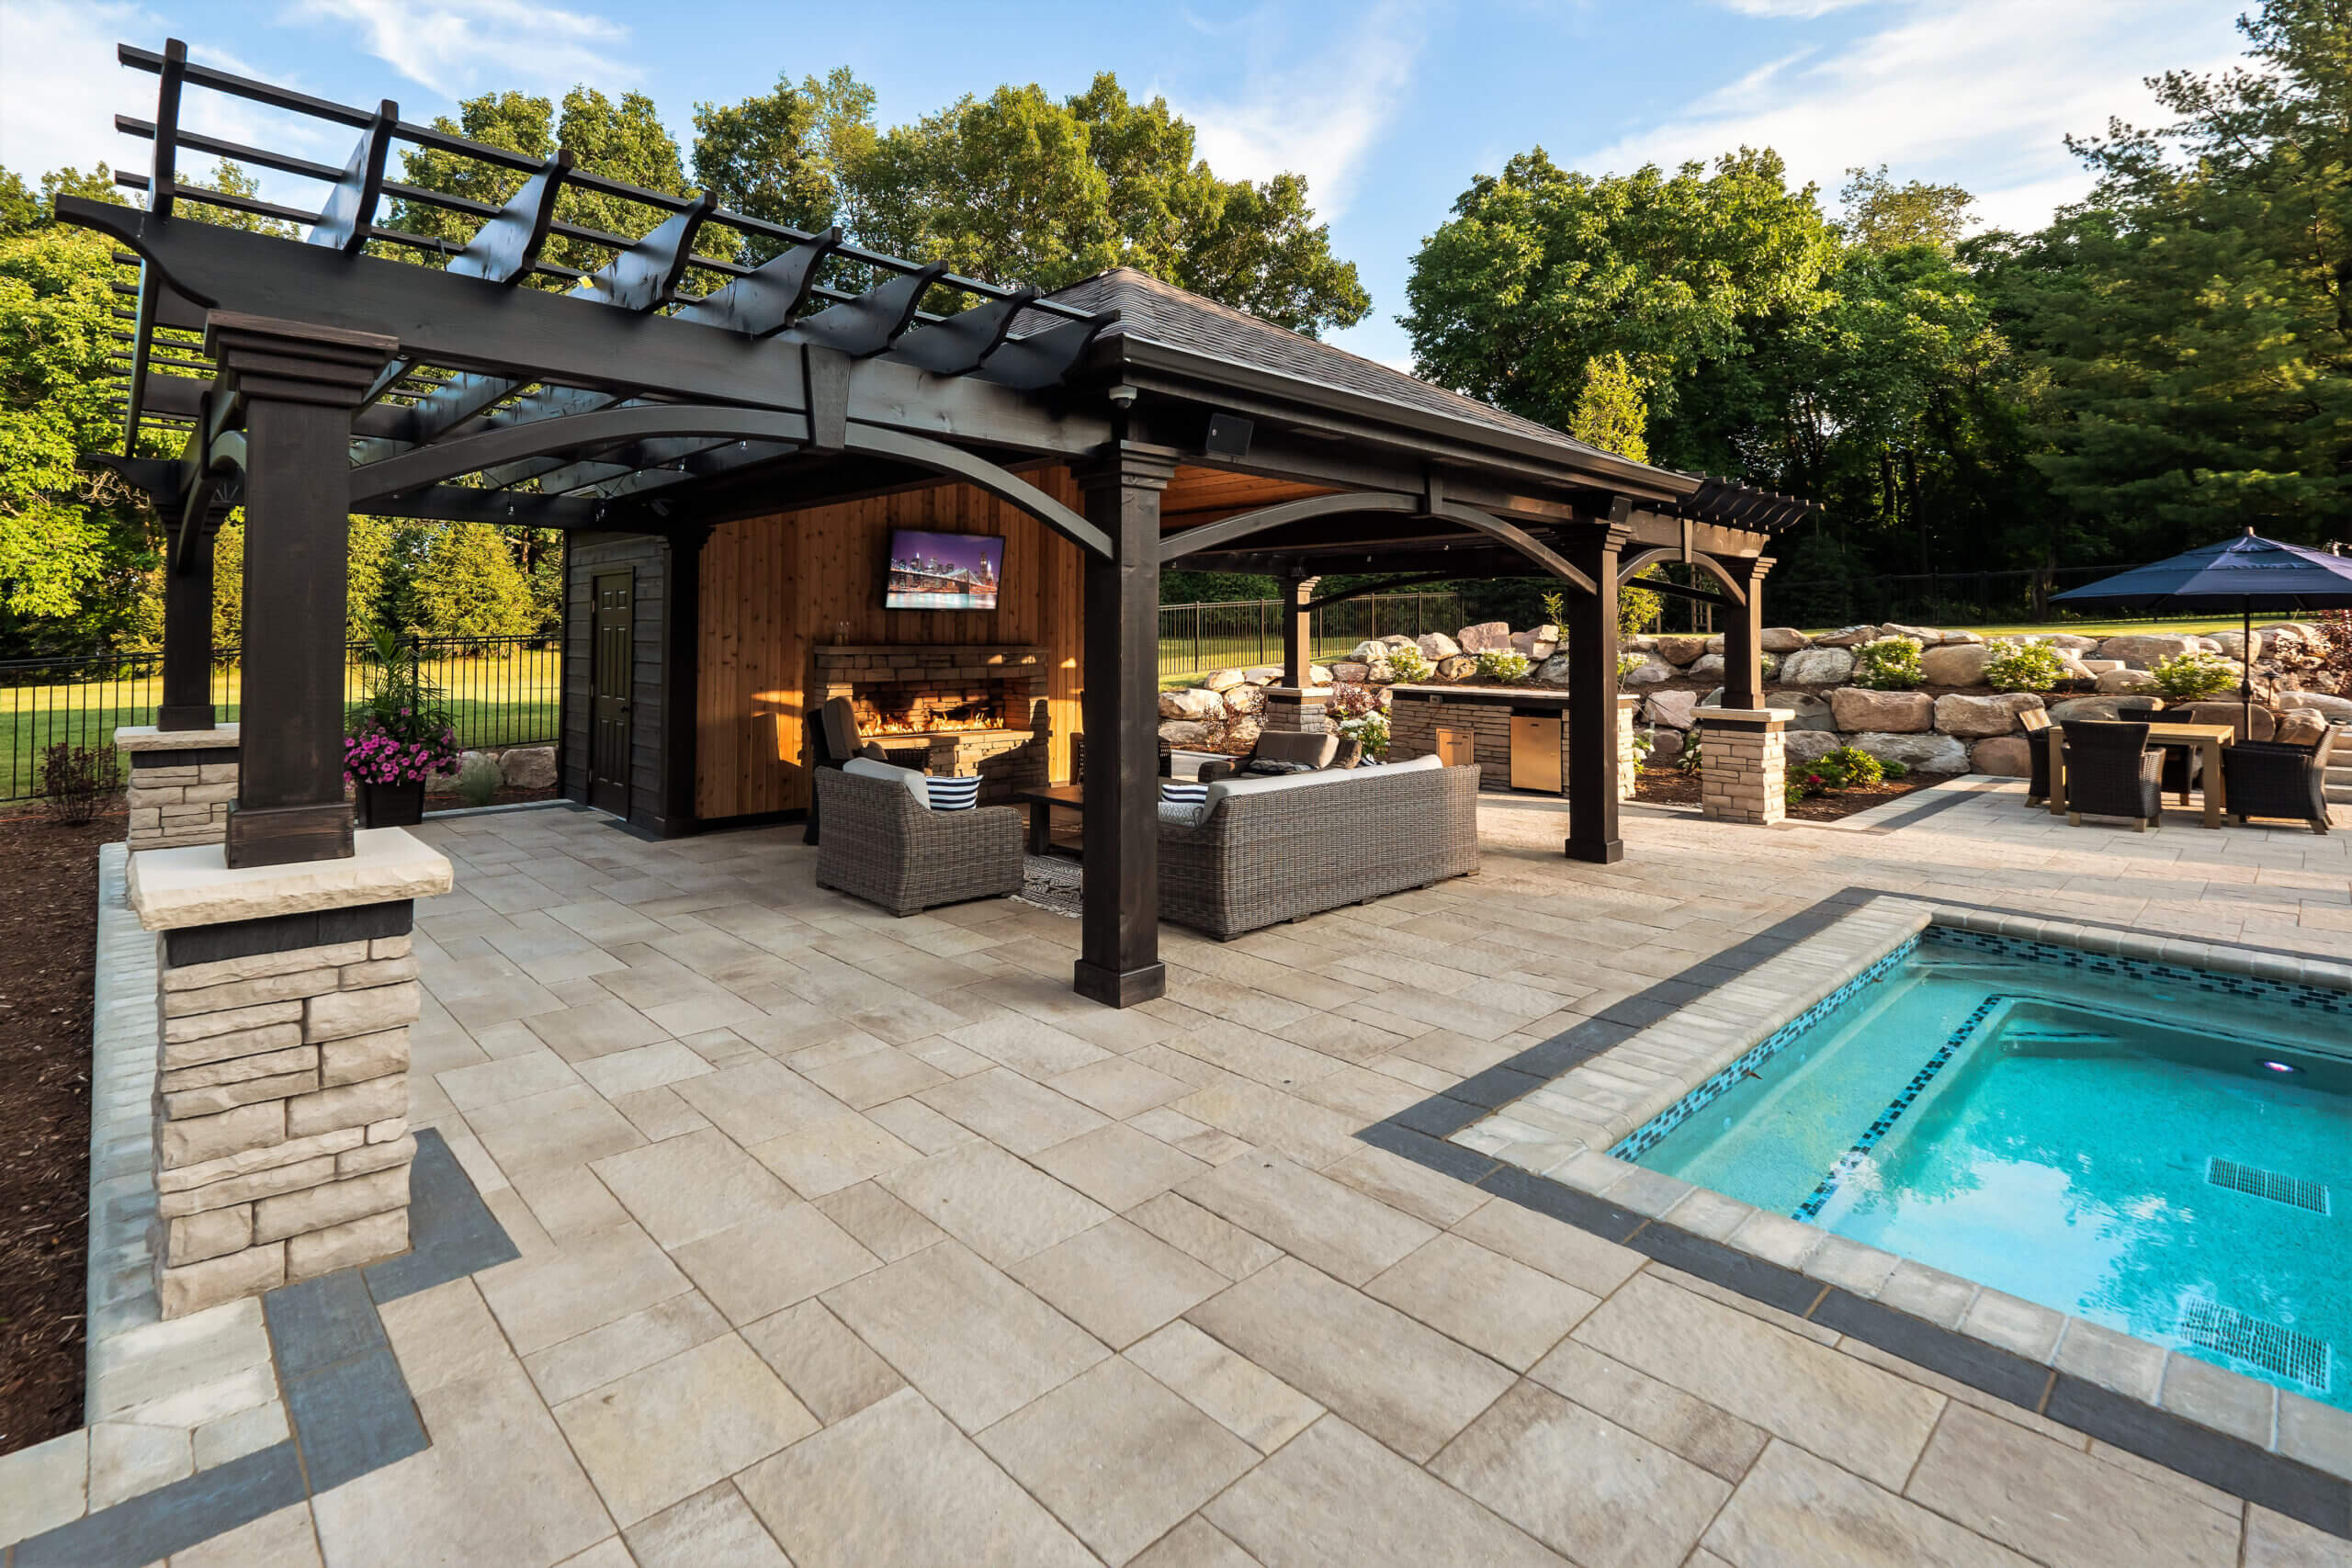 gunite pools, patio pavers, concrete paving, inground pools, pool and spa, fire bowls, patio covers in michigan, patio ideas, pool inspo, gazebos in michigan, cabanas in Michigan, backyard design, backyard landscape design, fire bowls, pool fountains, concrete builders, unilock, outdoor fireplaces in michigan, jacuzzi, outdoor hot tubs, pergola, gazebo, backyard ideas, patio design near me